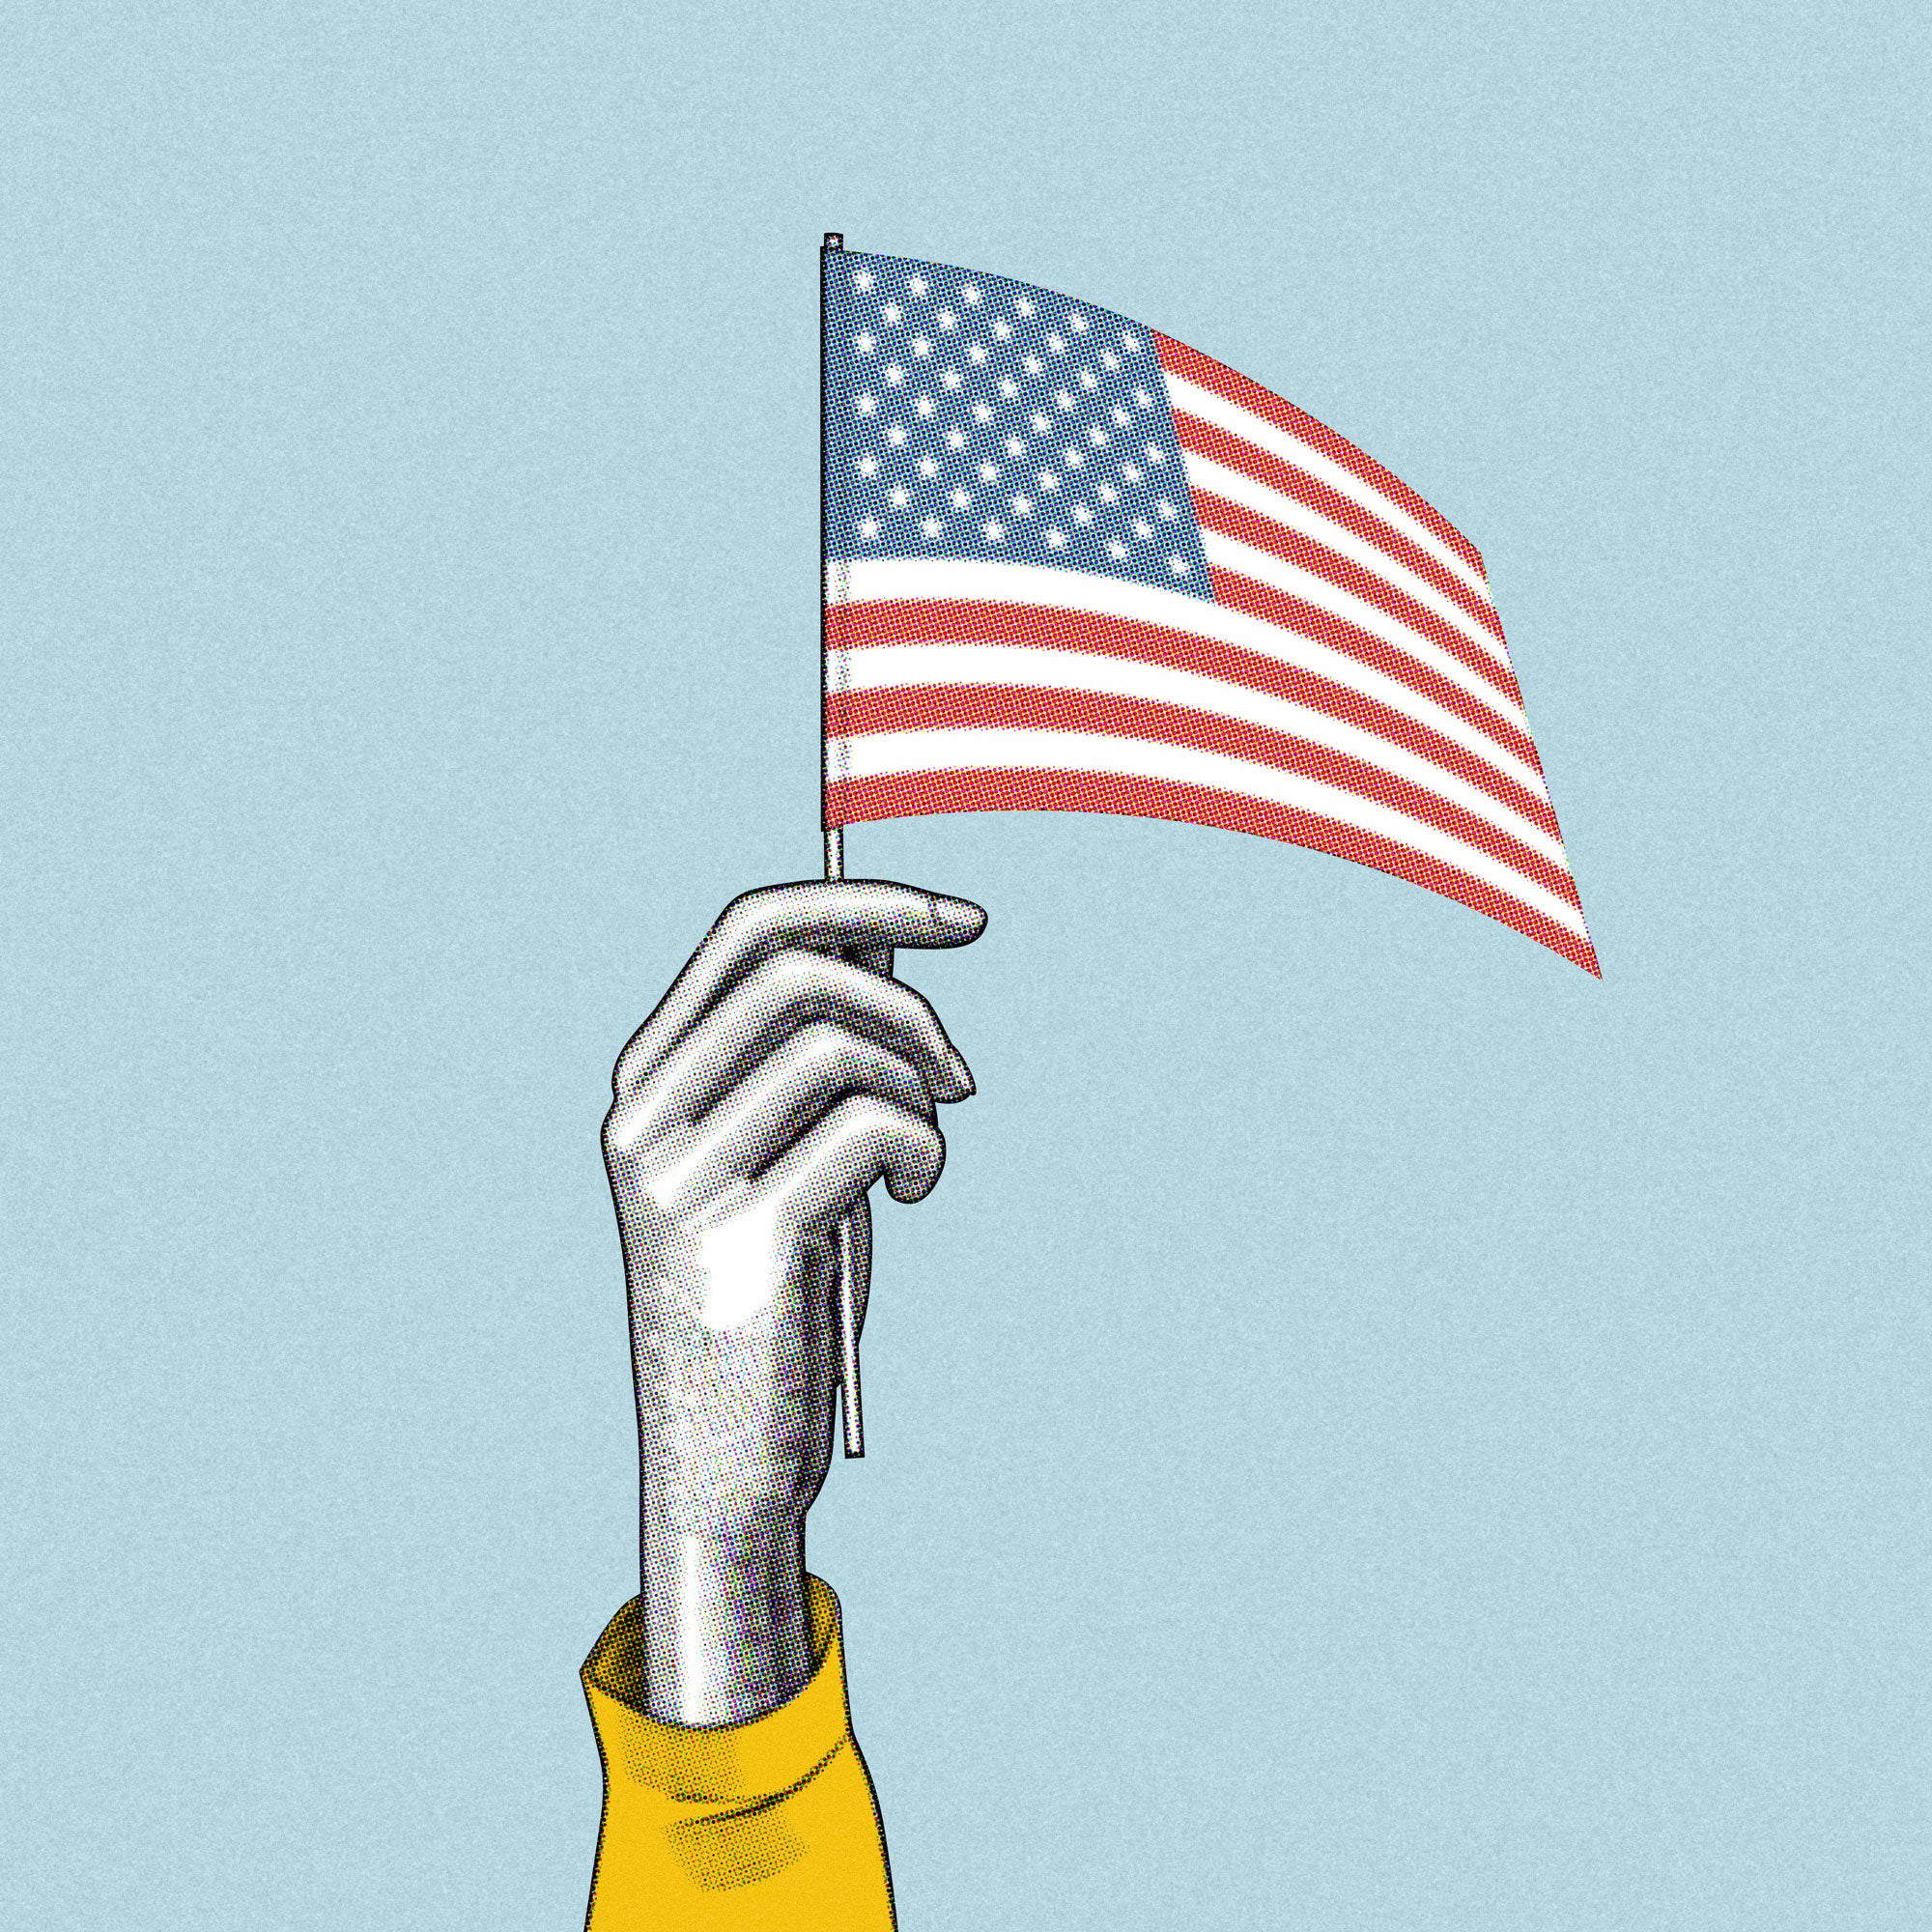 Illustration of a hand holding an American flag.